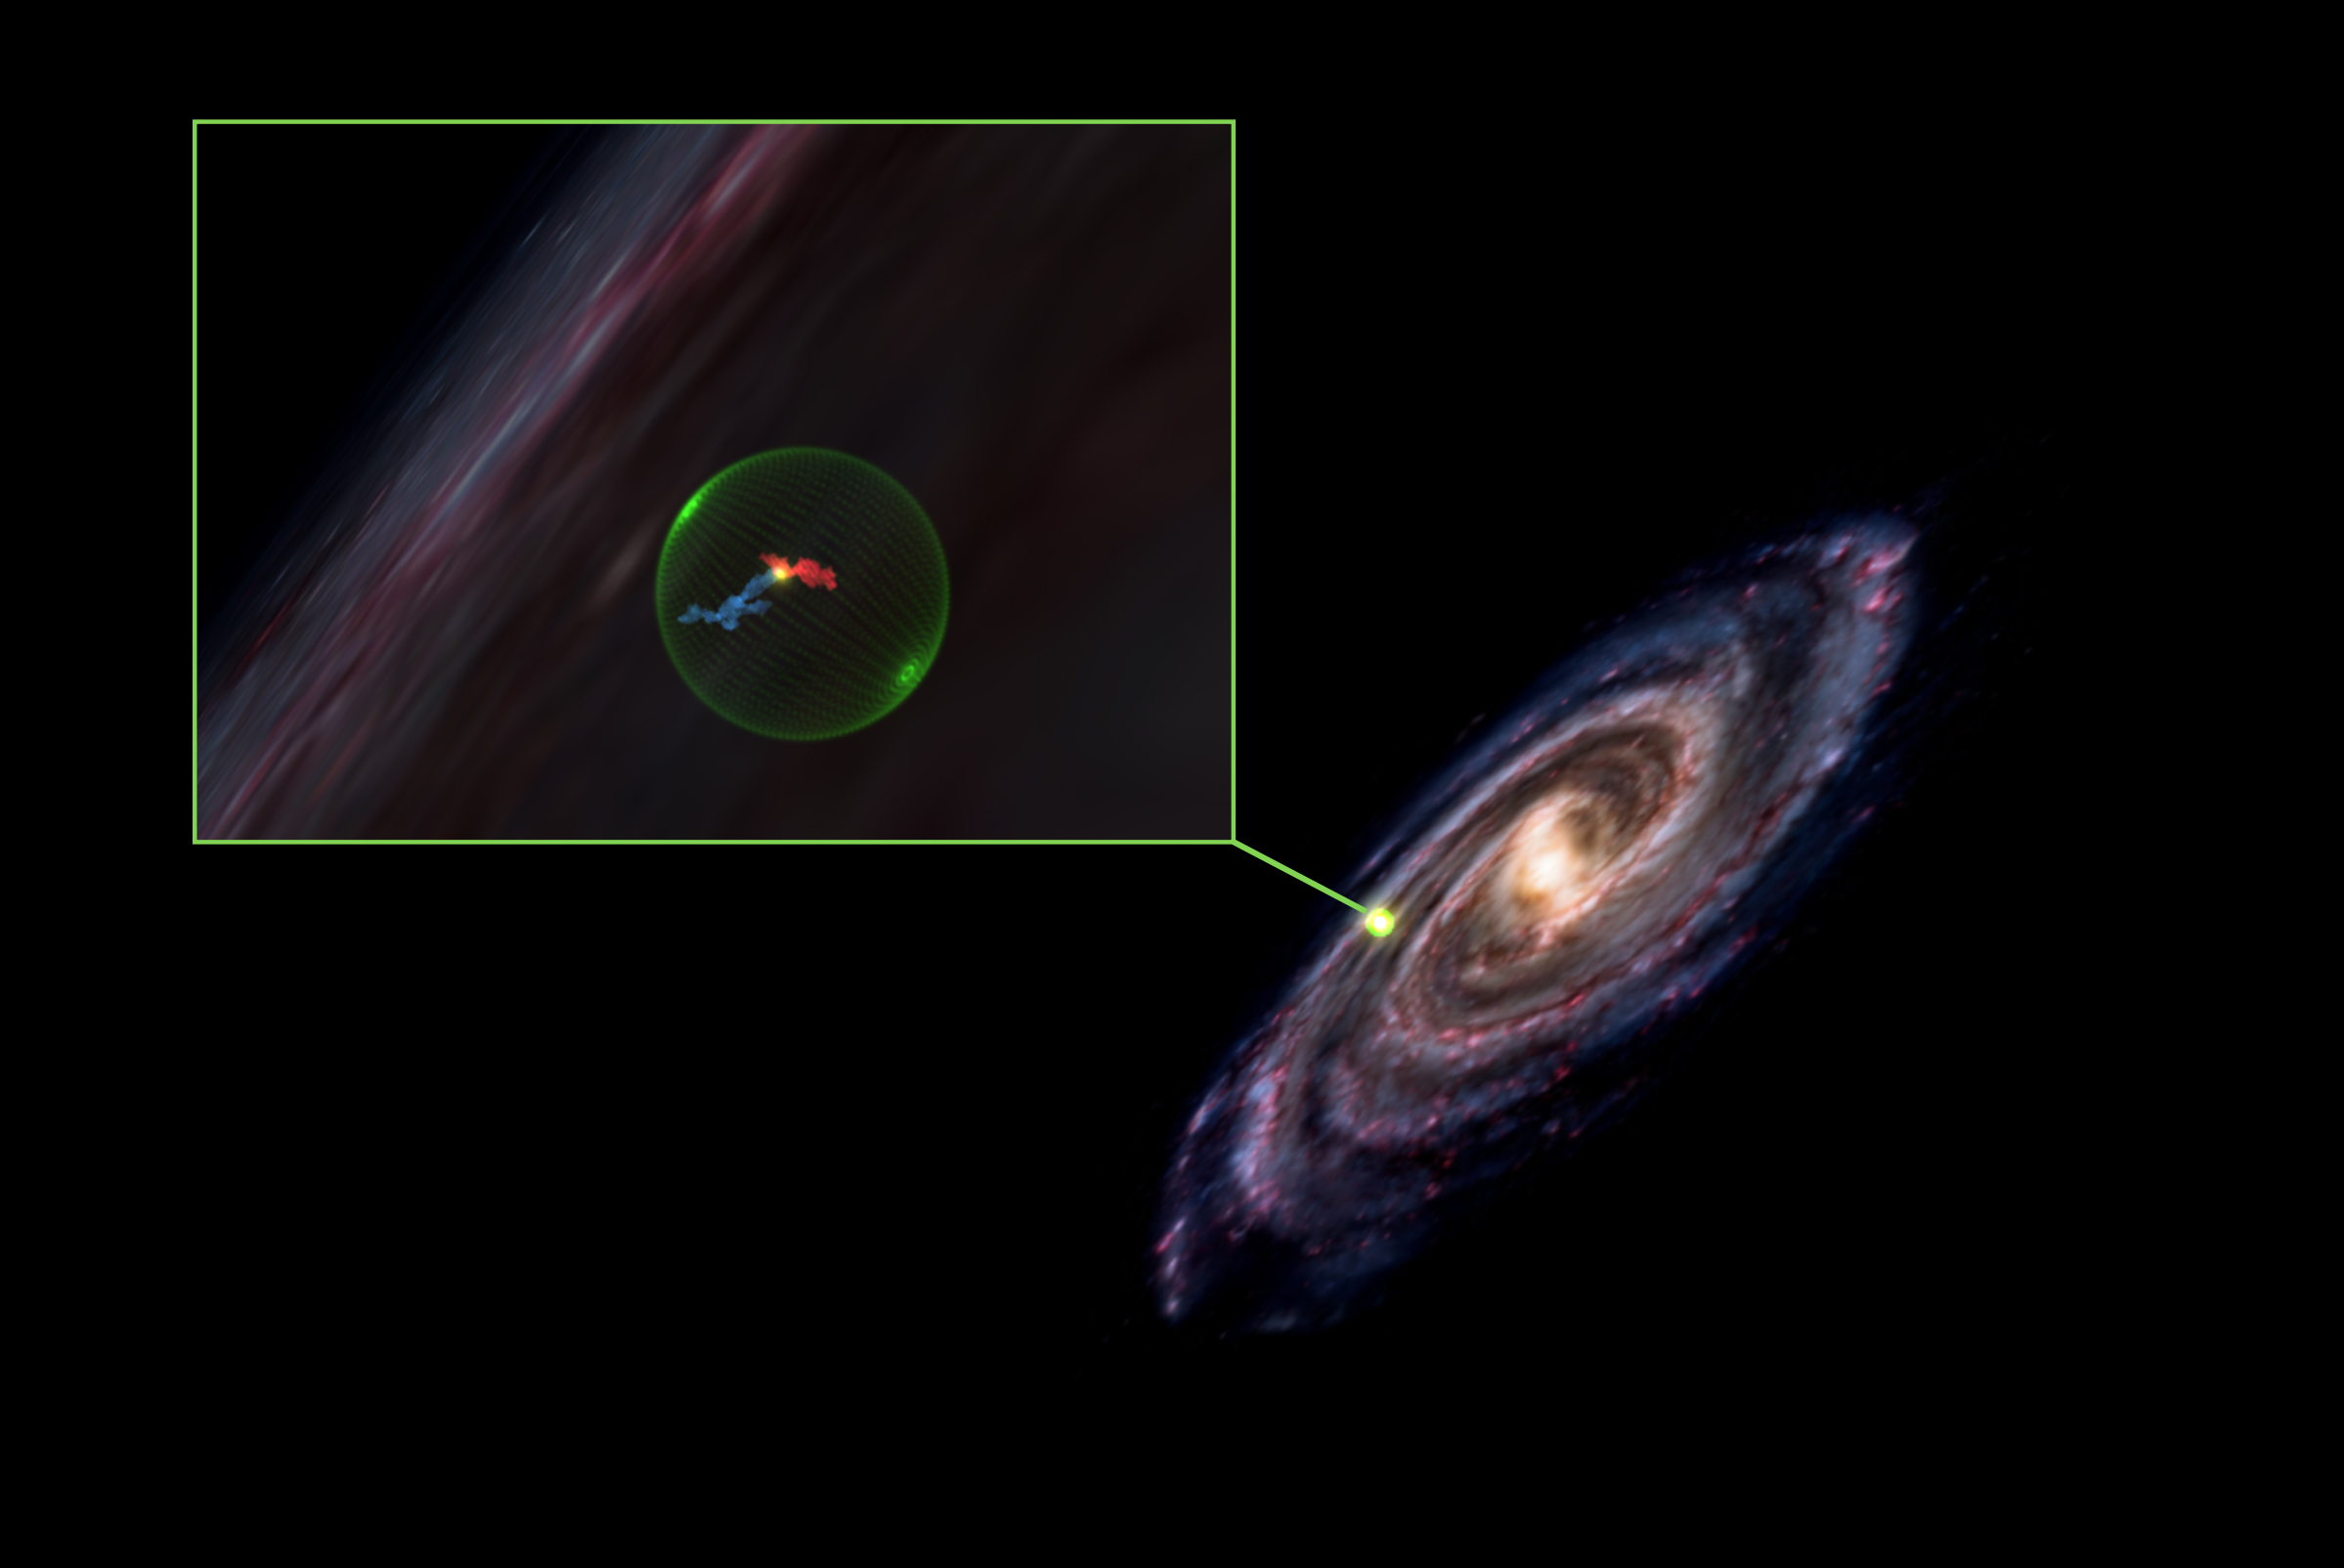 Astronomers have discovered a giant, spherical cavity within the Milky Way galaxy; its location is depicted on the right. A zoomed in view of the cavity (left) shows the Perseus and Taurus molecular clouds in red and blue, respectively. Though the clouds appear to touch in this 2D view, new 3D images of the clouds show they lie at very different distances on the surface of the cavity shown in green. This image was produced in glue using WorldWide Telescope's Milky Way data-driven cartoon (produced by Robert Hurt).Watch an explainer video exploring how the cavity was formed and what it looks like in 3D here. The public may also view the cavity in augmented reality; learn how here.